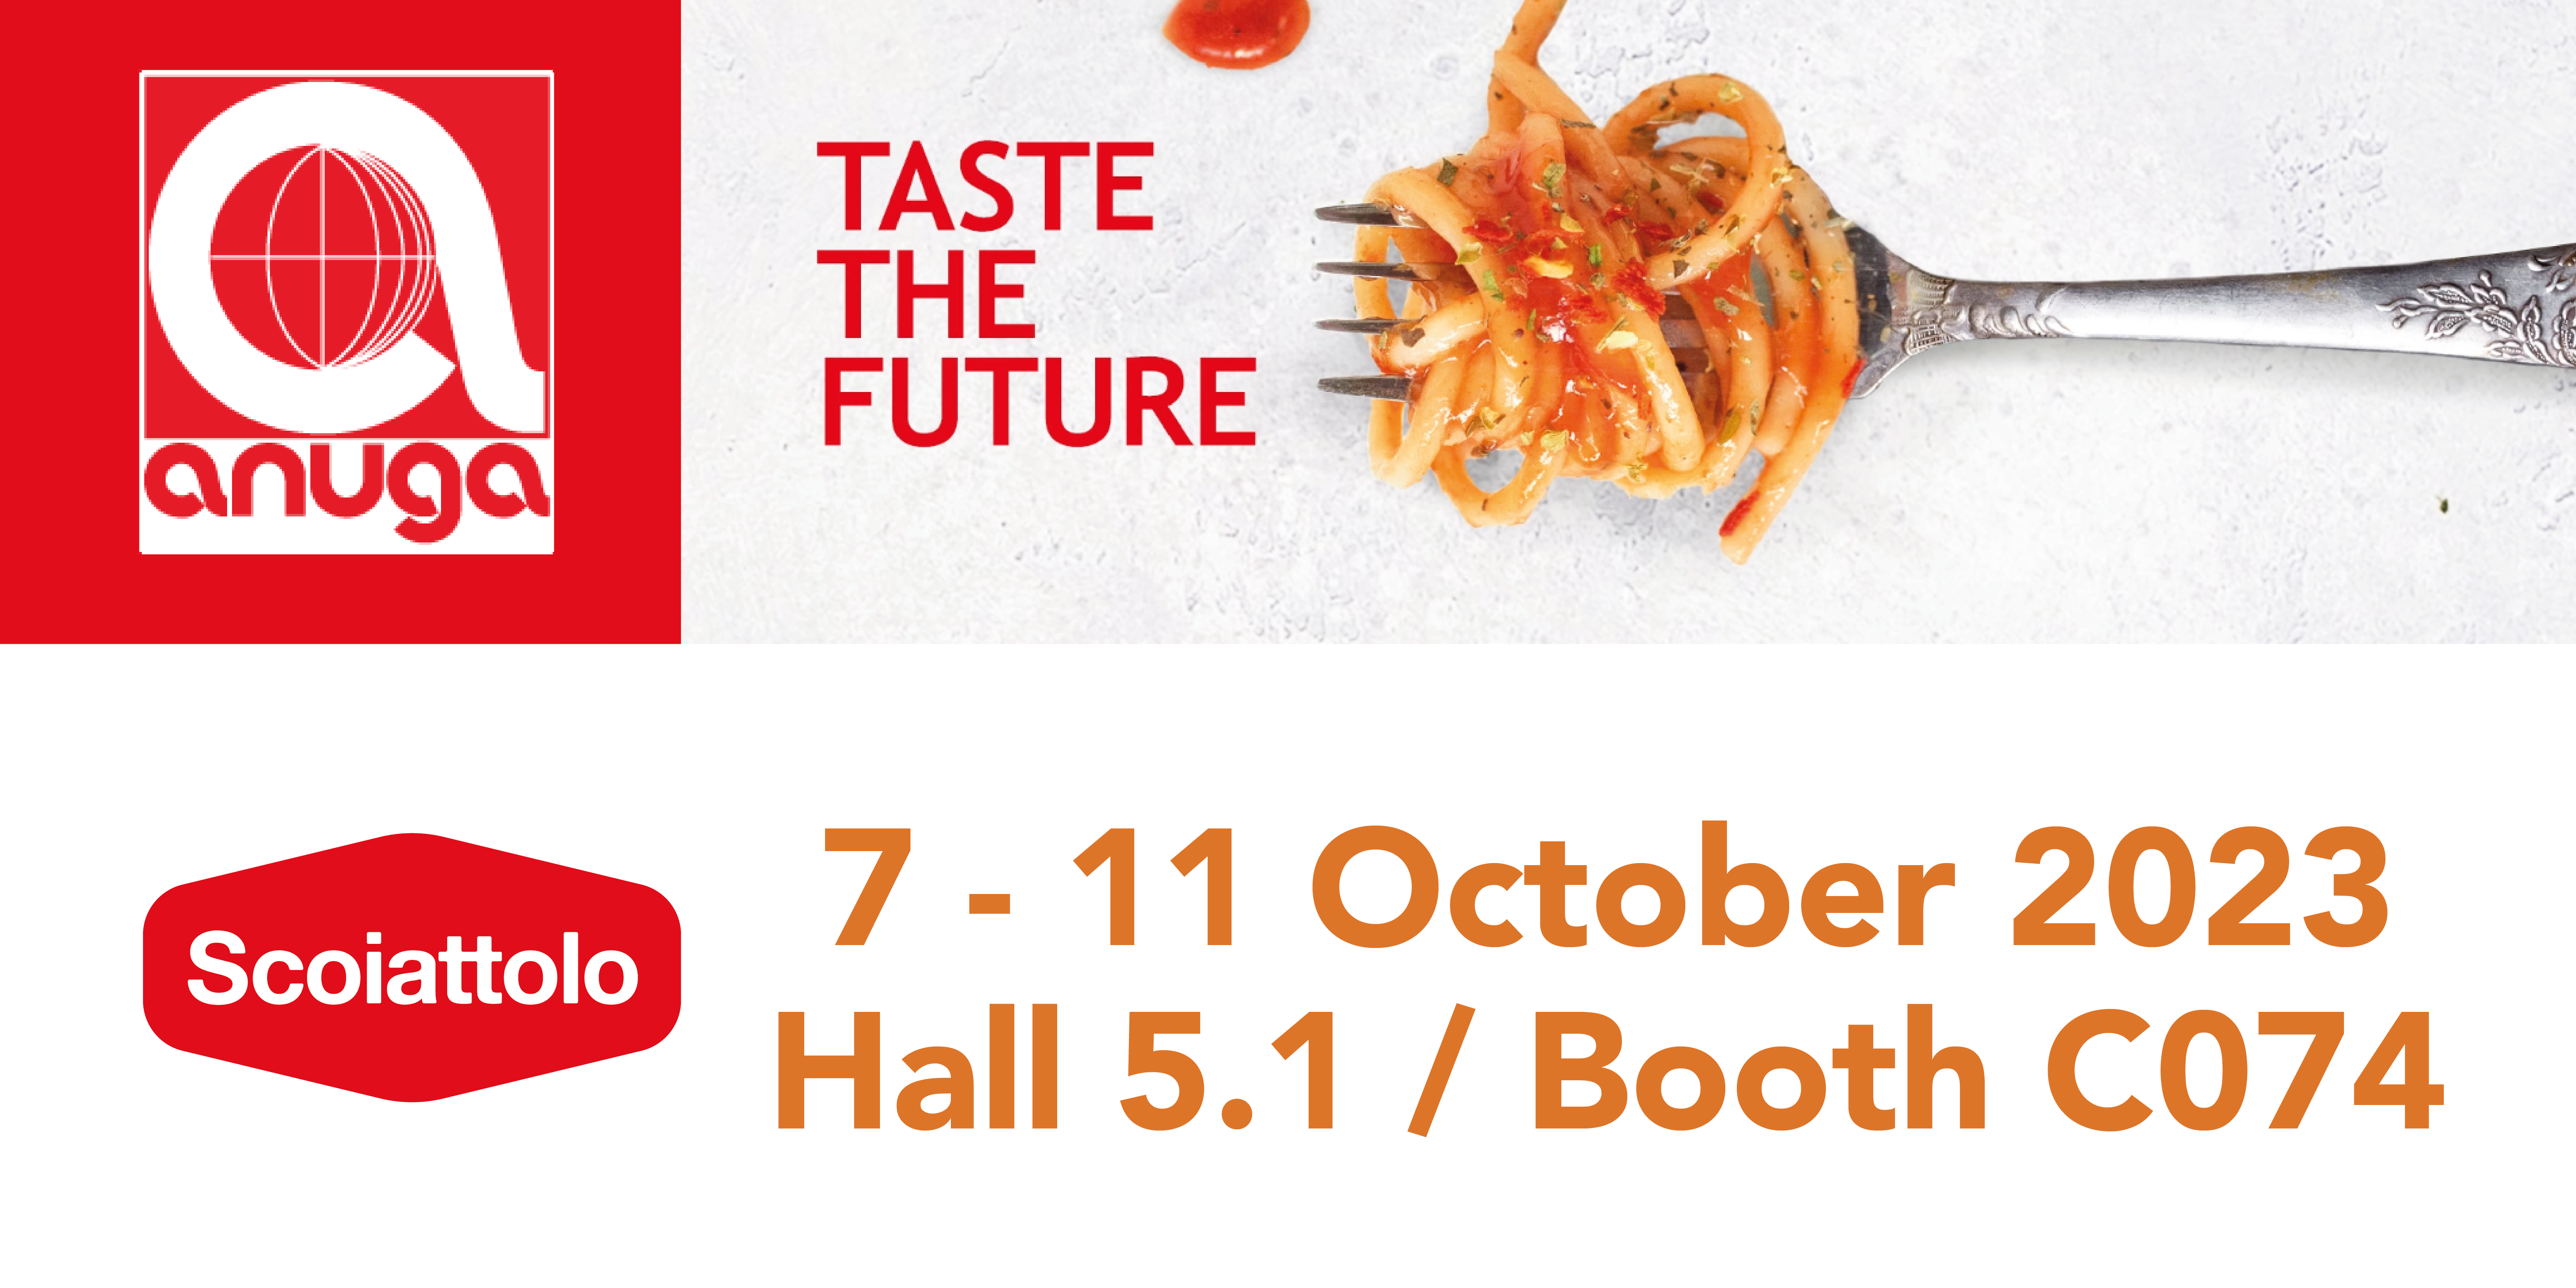 SCOIATTOLO AT ANUGA 2023: <br> from 7 to 11 October in Cologne